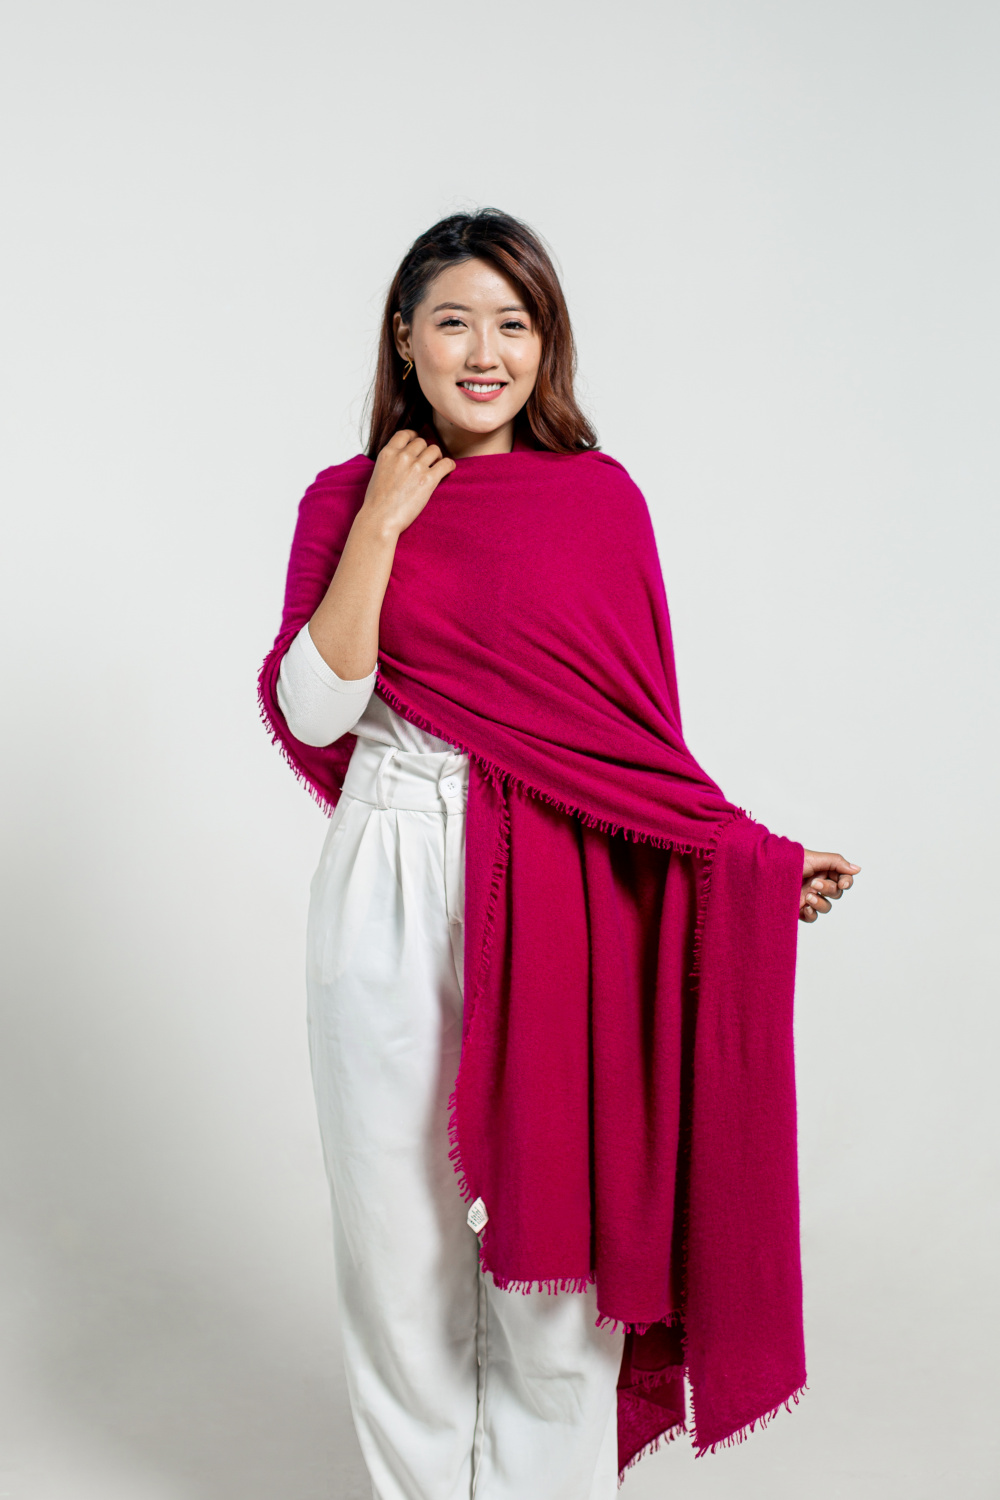 Hot Pink Felted Cashmere Wrap